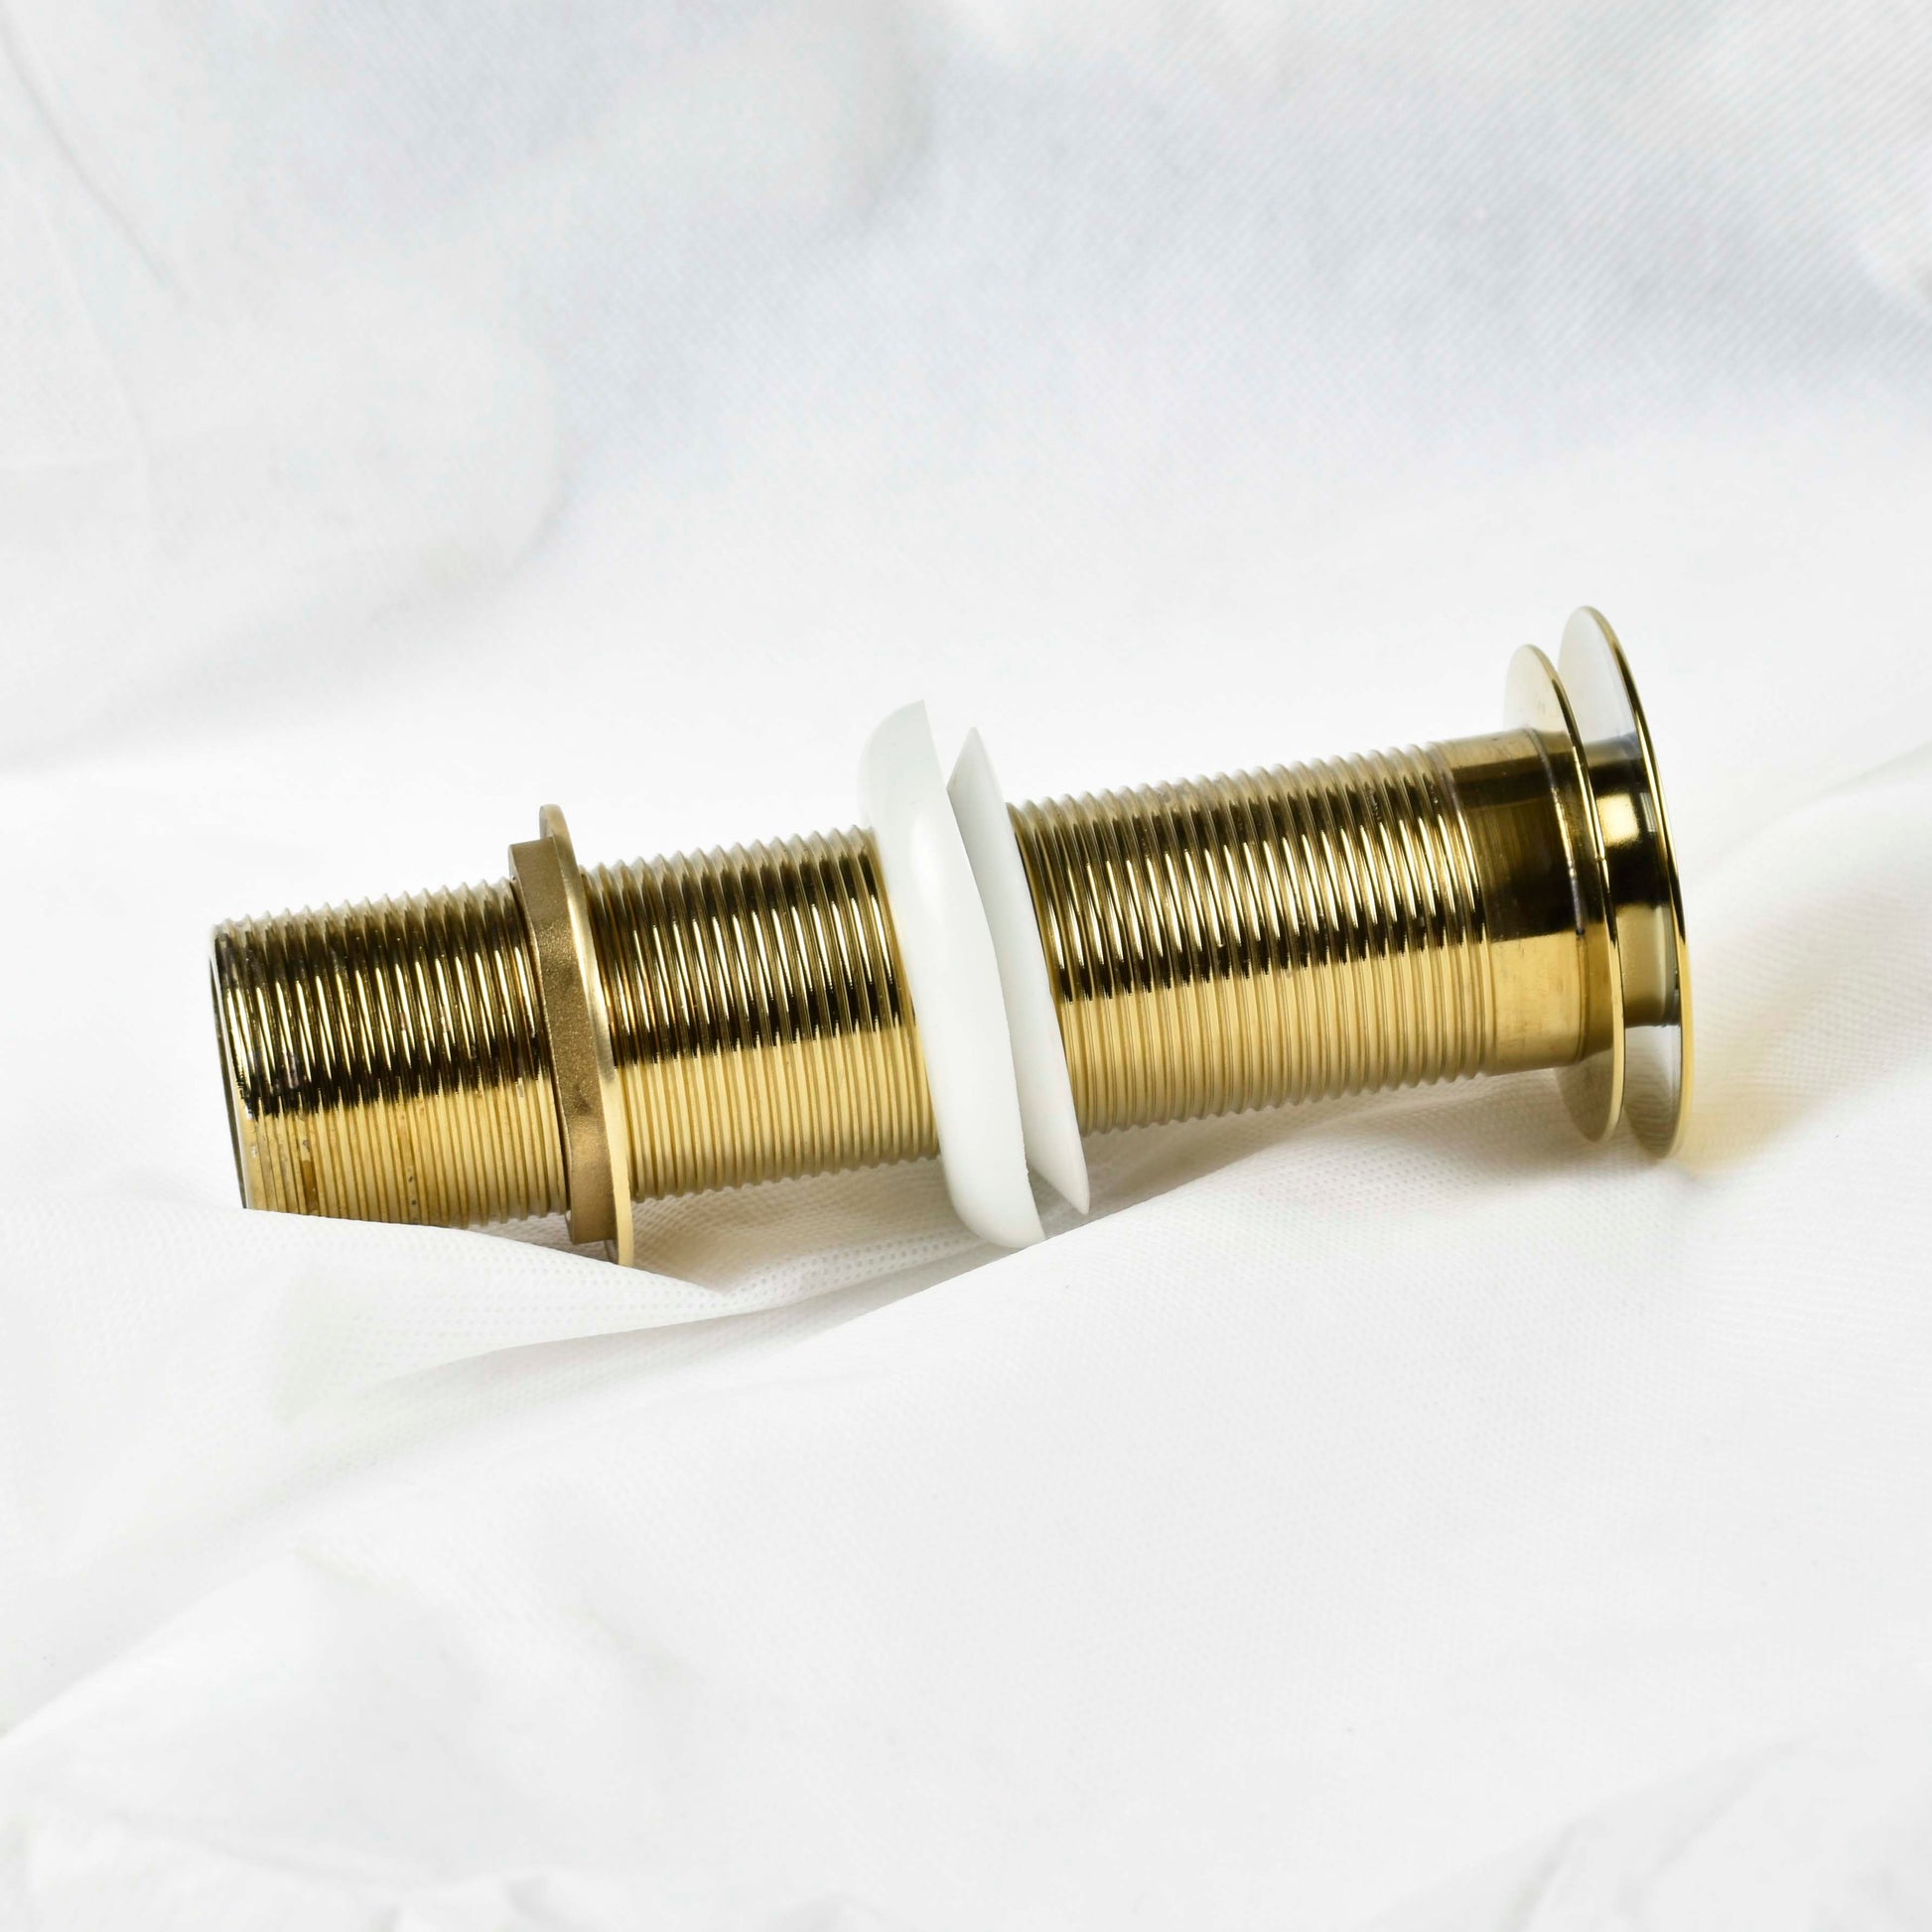 InArt Brass Full Threaded Pop-Up Waste Coupling 32 MM (7", Gold) - InArt-Studio